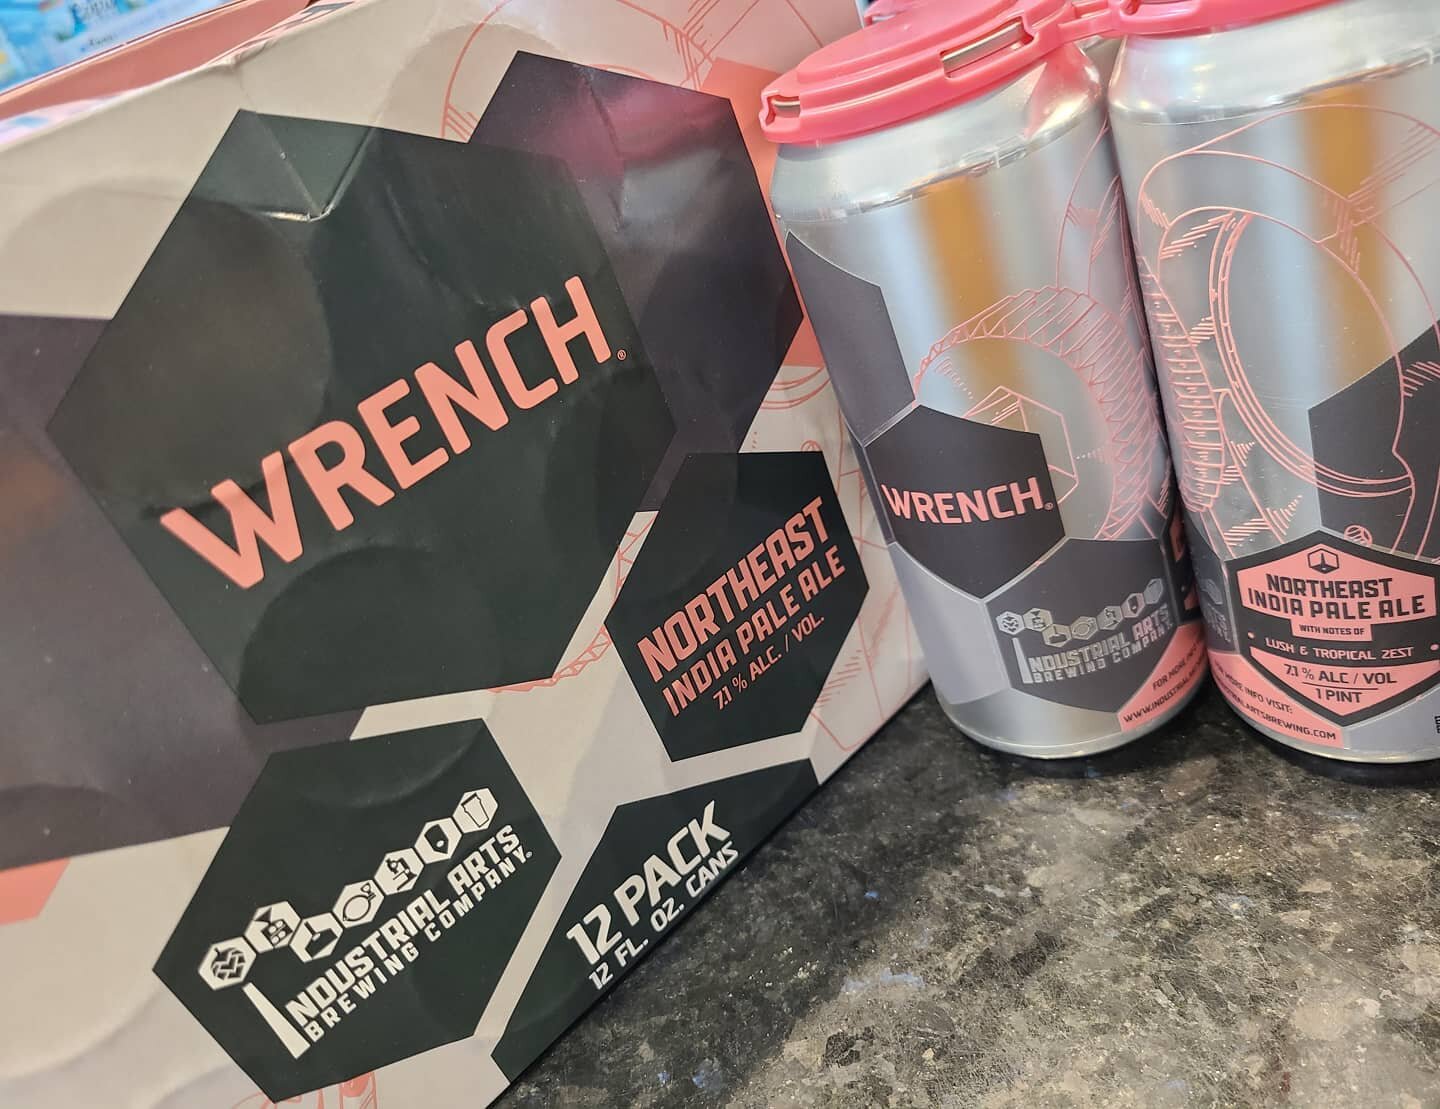 Industrial Arts &quot;WRENCH&quot; , now available in 12 pack cans! 

#samsbeverage #samsbeverageplace #easthampton #amagansett #montauk #longisland #easthamptonvillage #hamptons #racelane